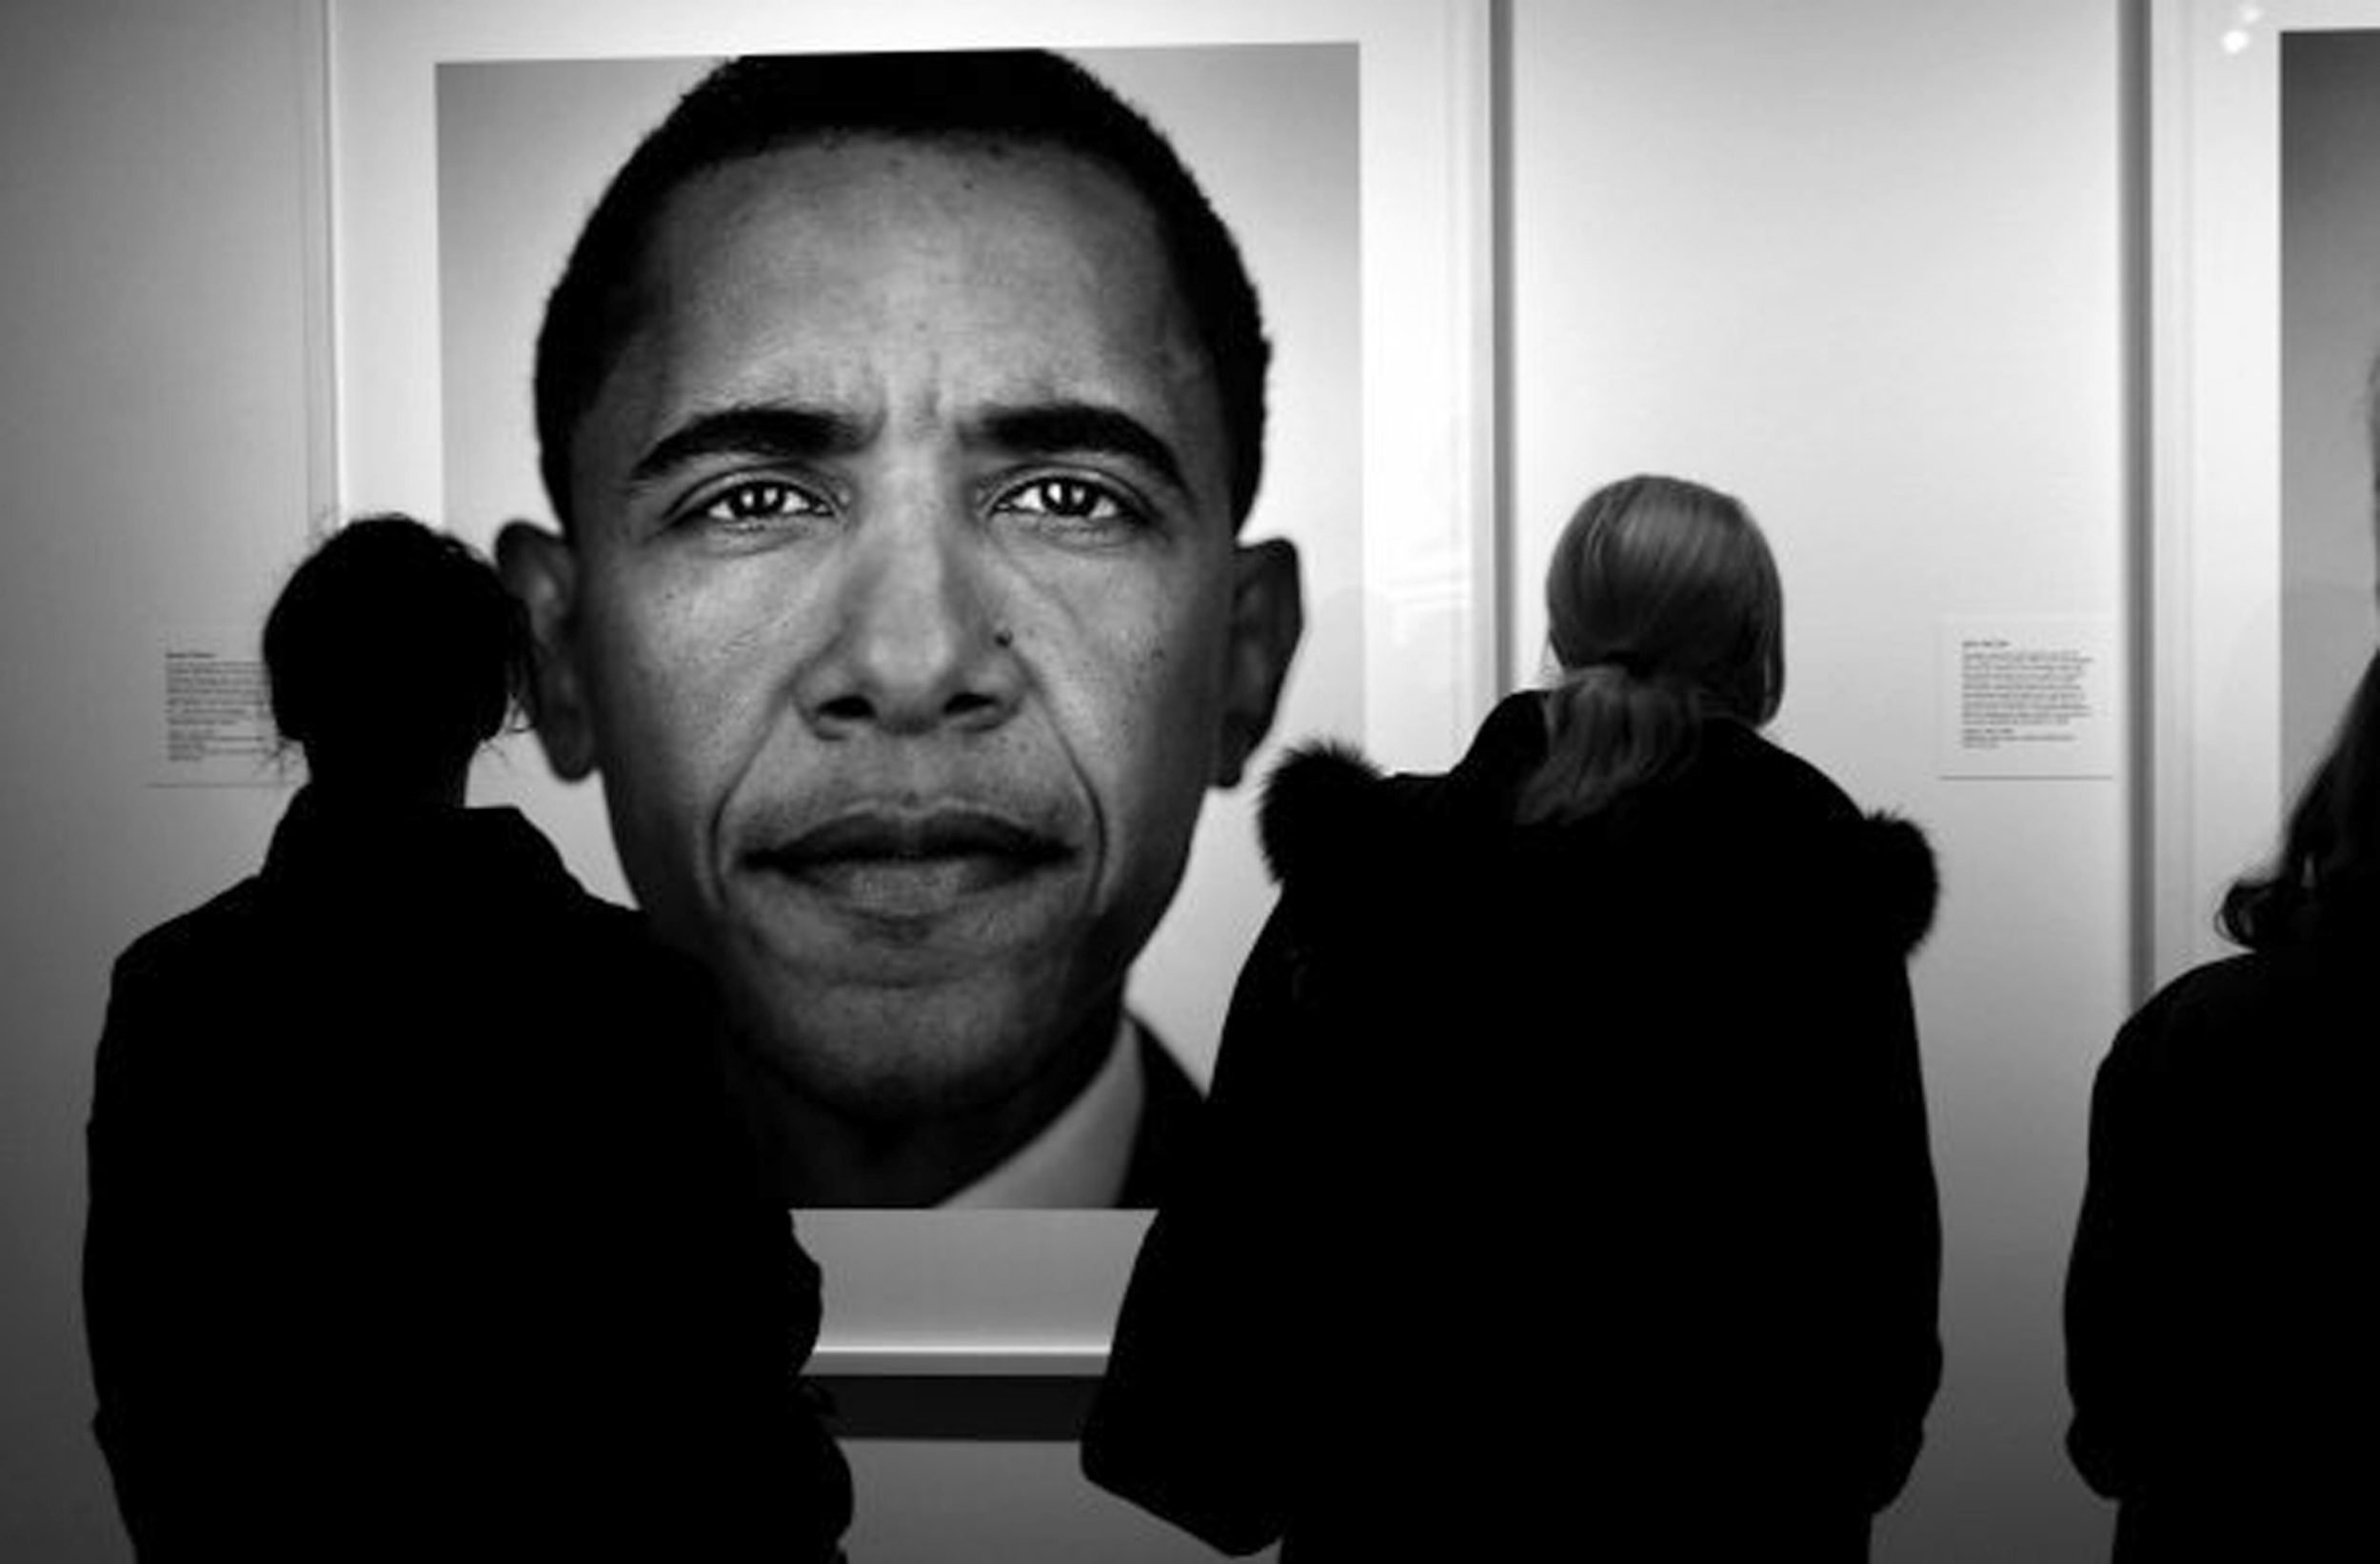 Portrait of President Barack Hussein Obama by Martin Schoeller at the National Portrait Gallery in Washington D.C. before the inauguration, January 2009.  